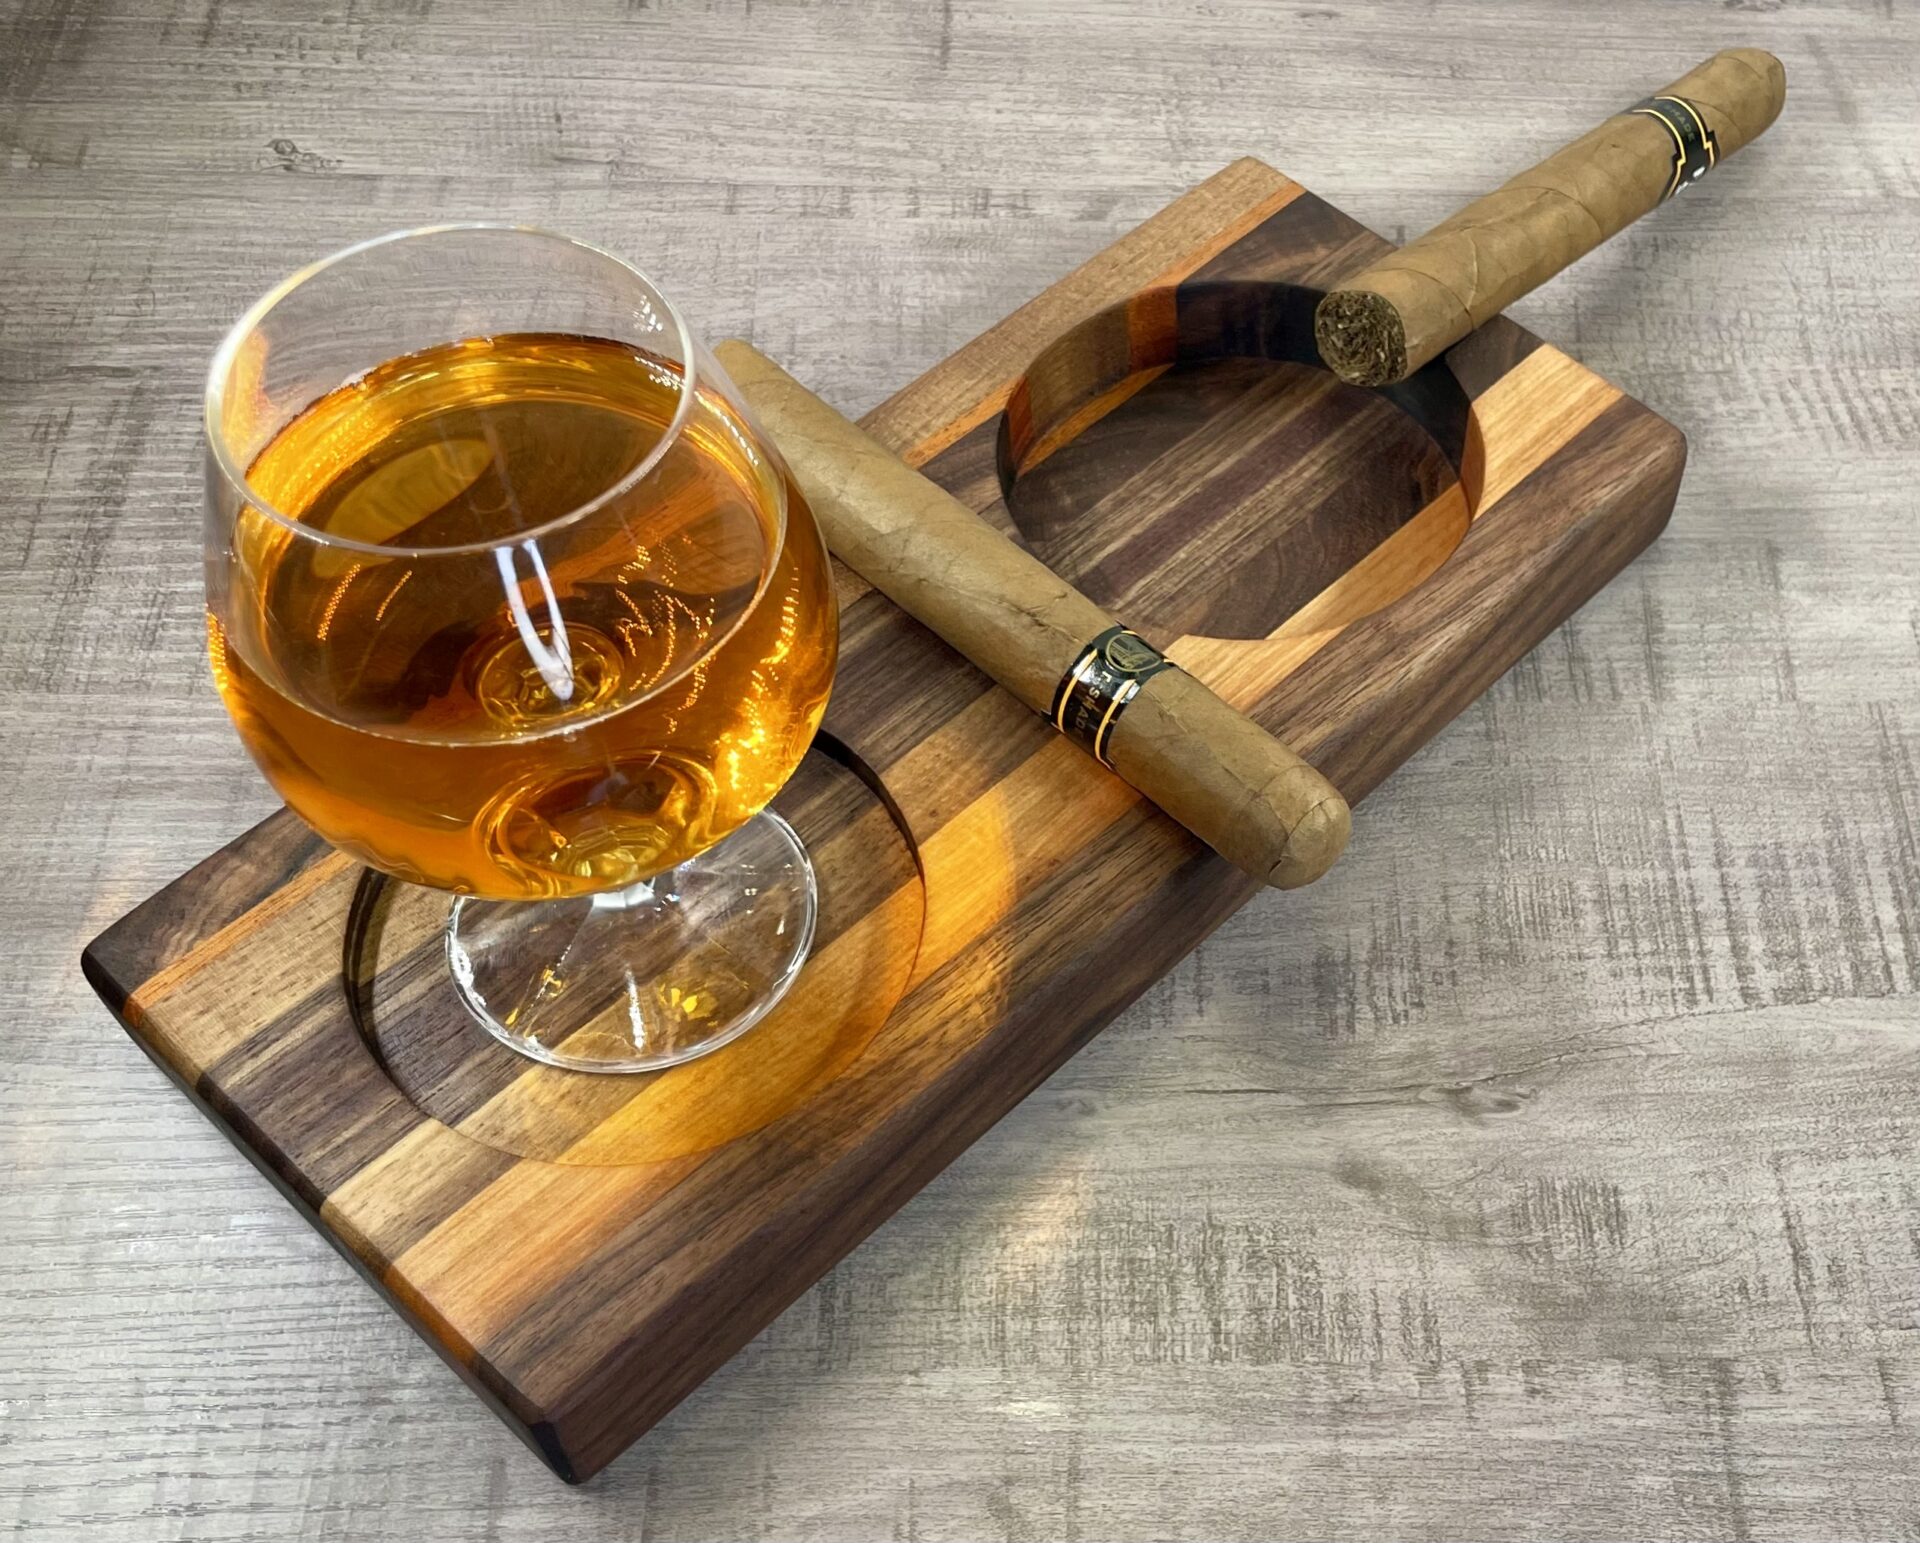 Cigar Ashtray and Drink Coaster - Spouse-ly